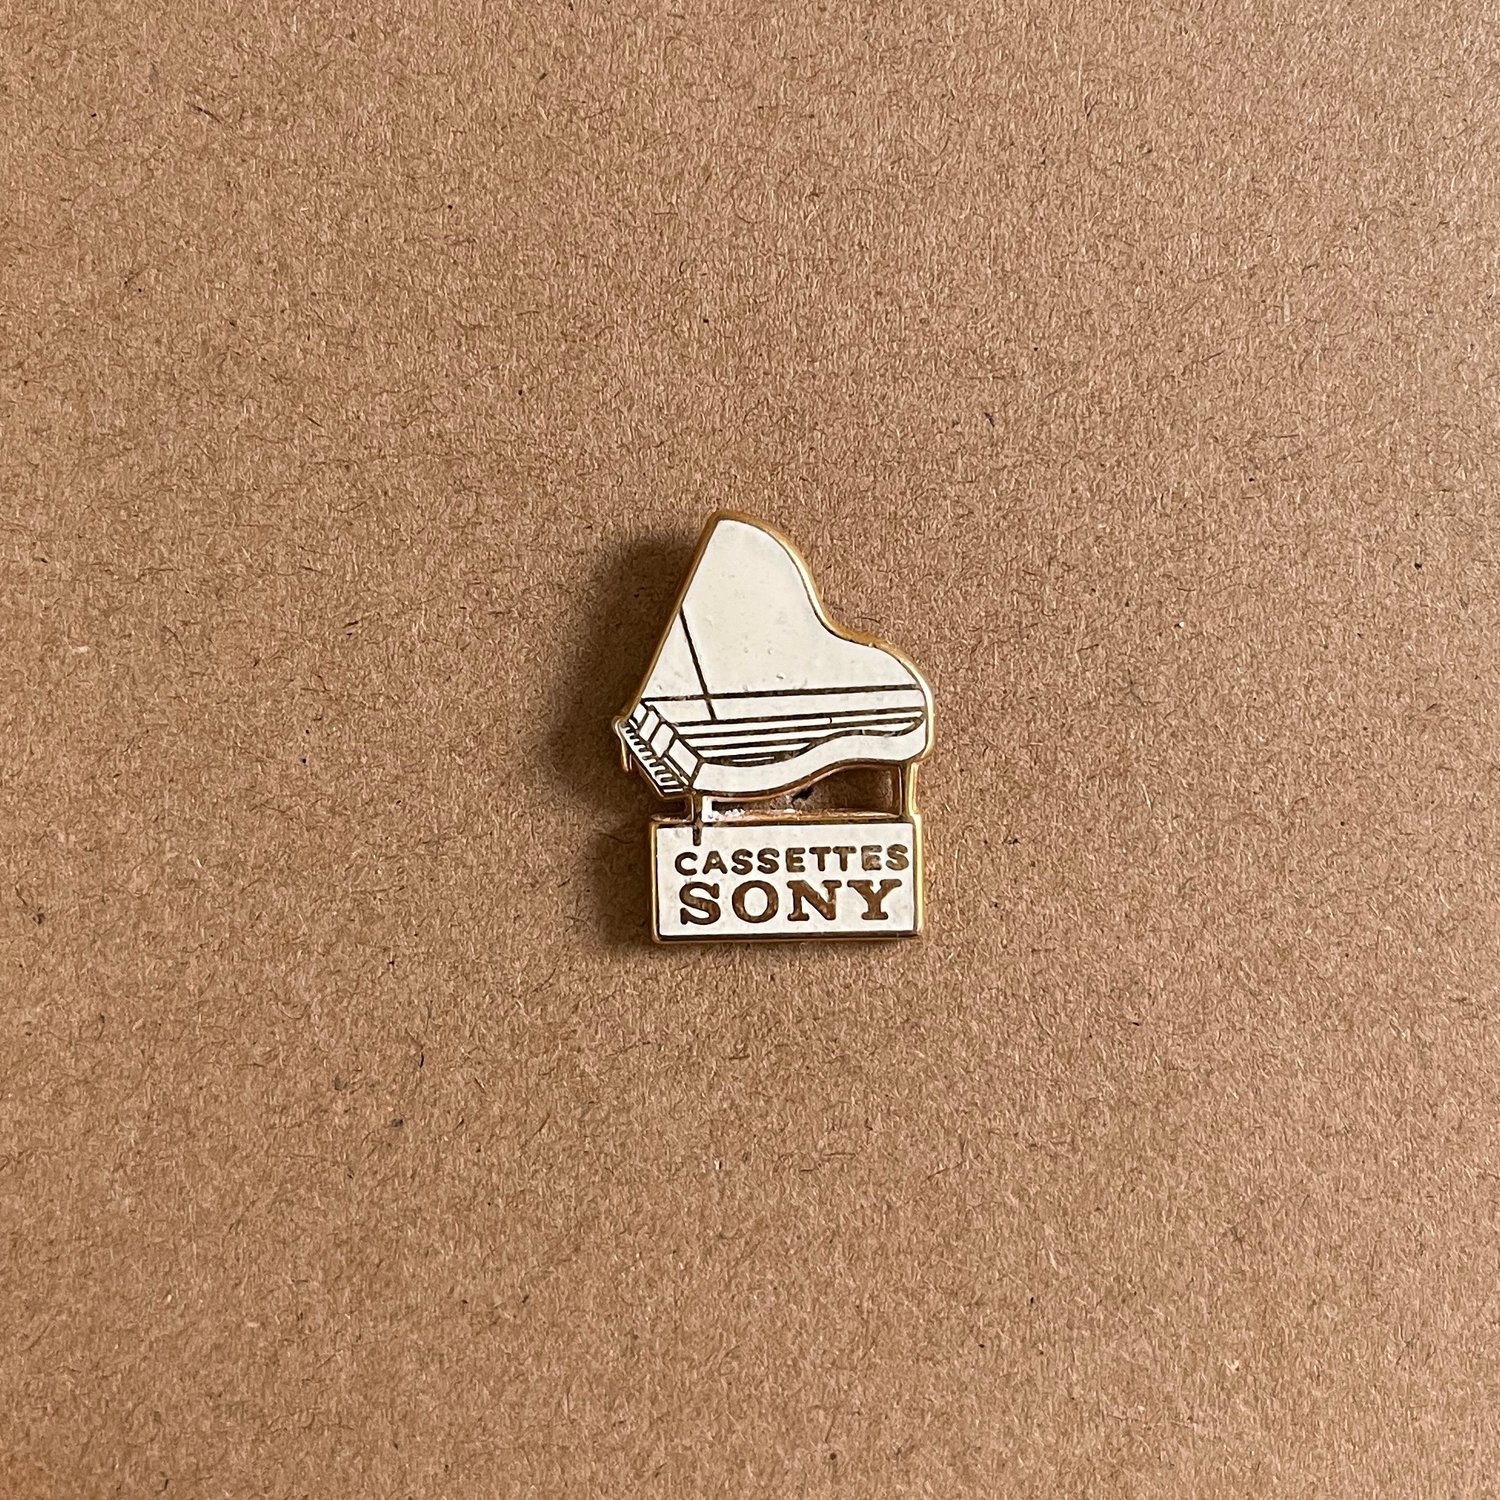 Image of Sony Cassettes Pin